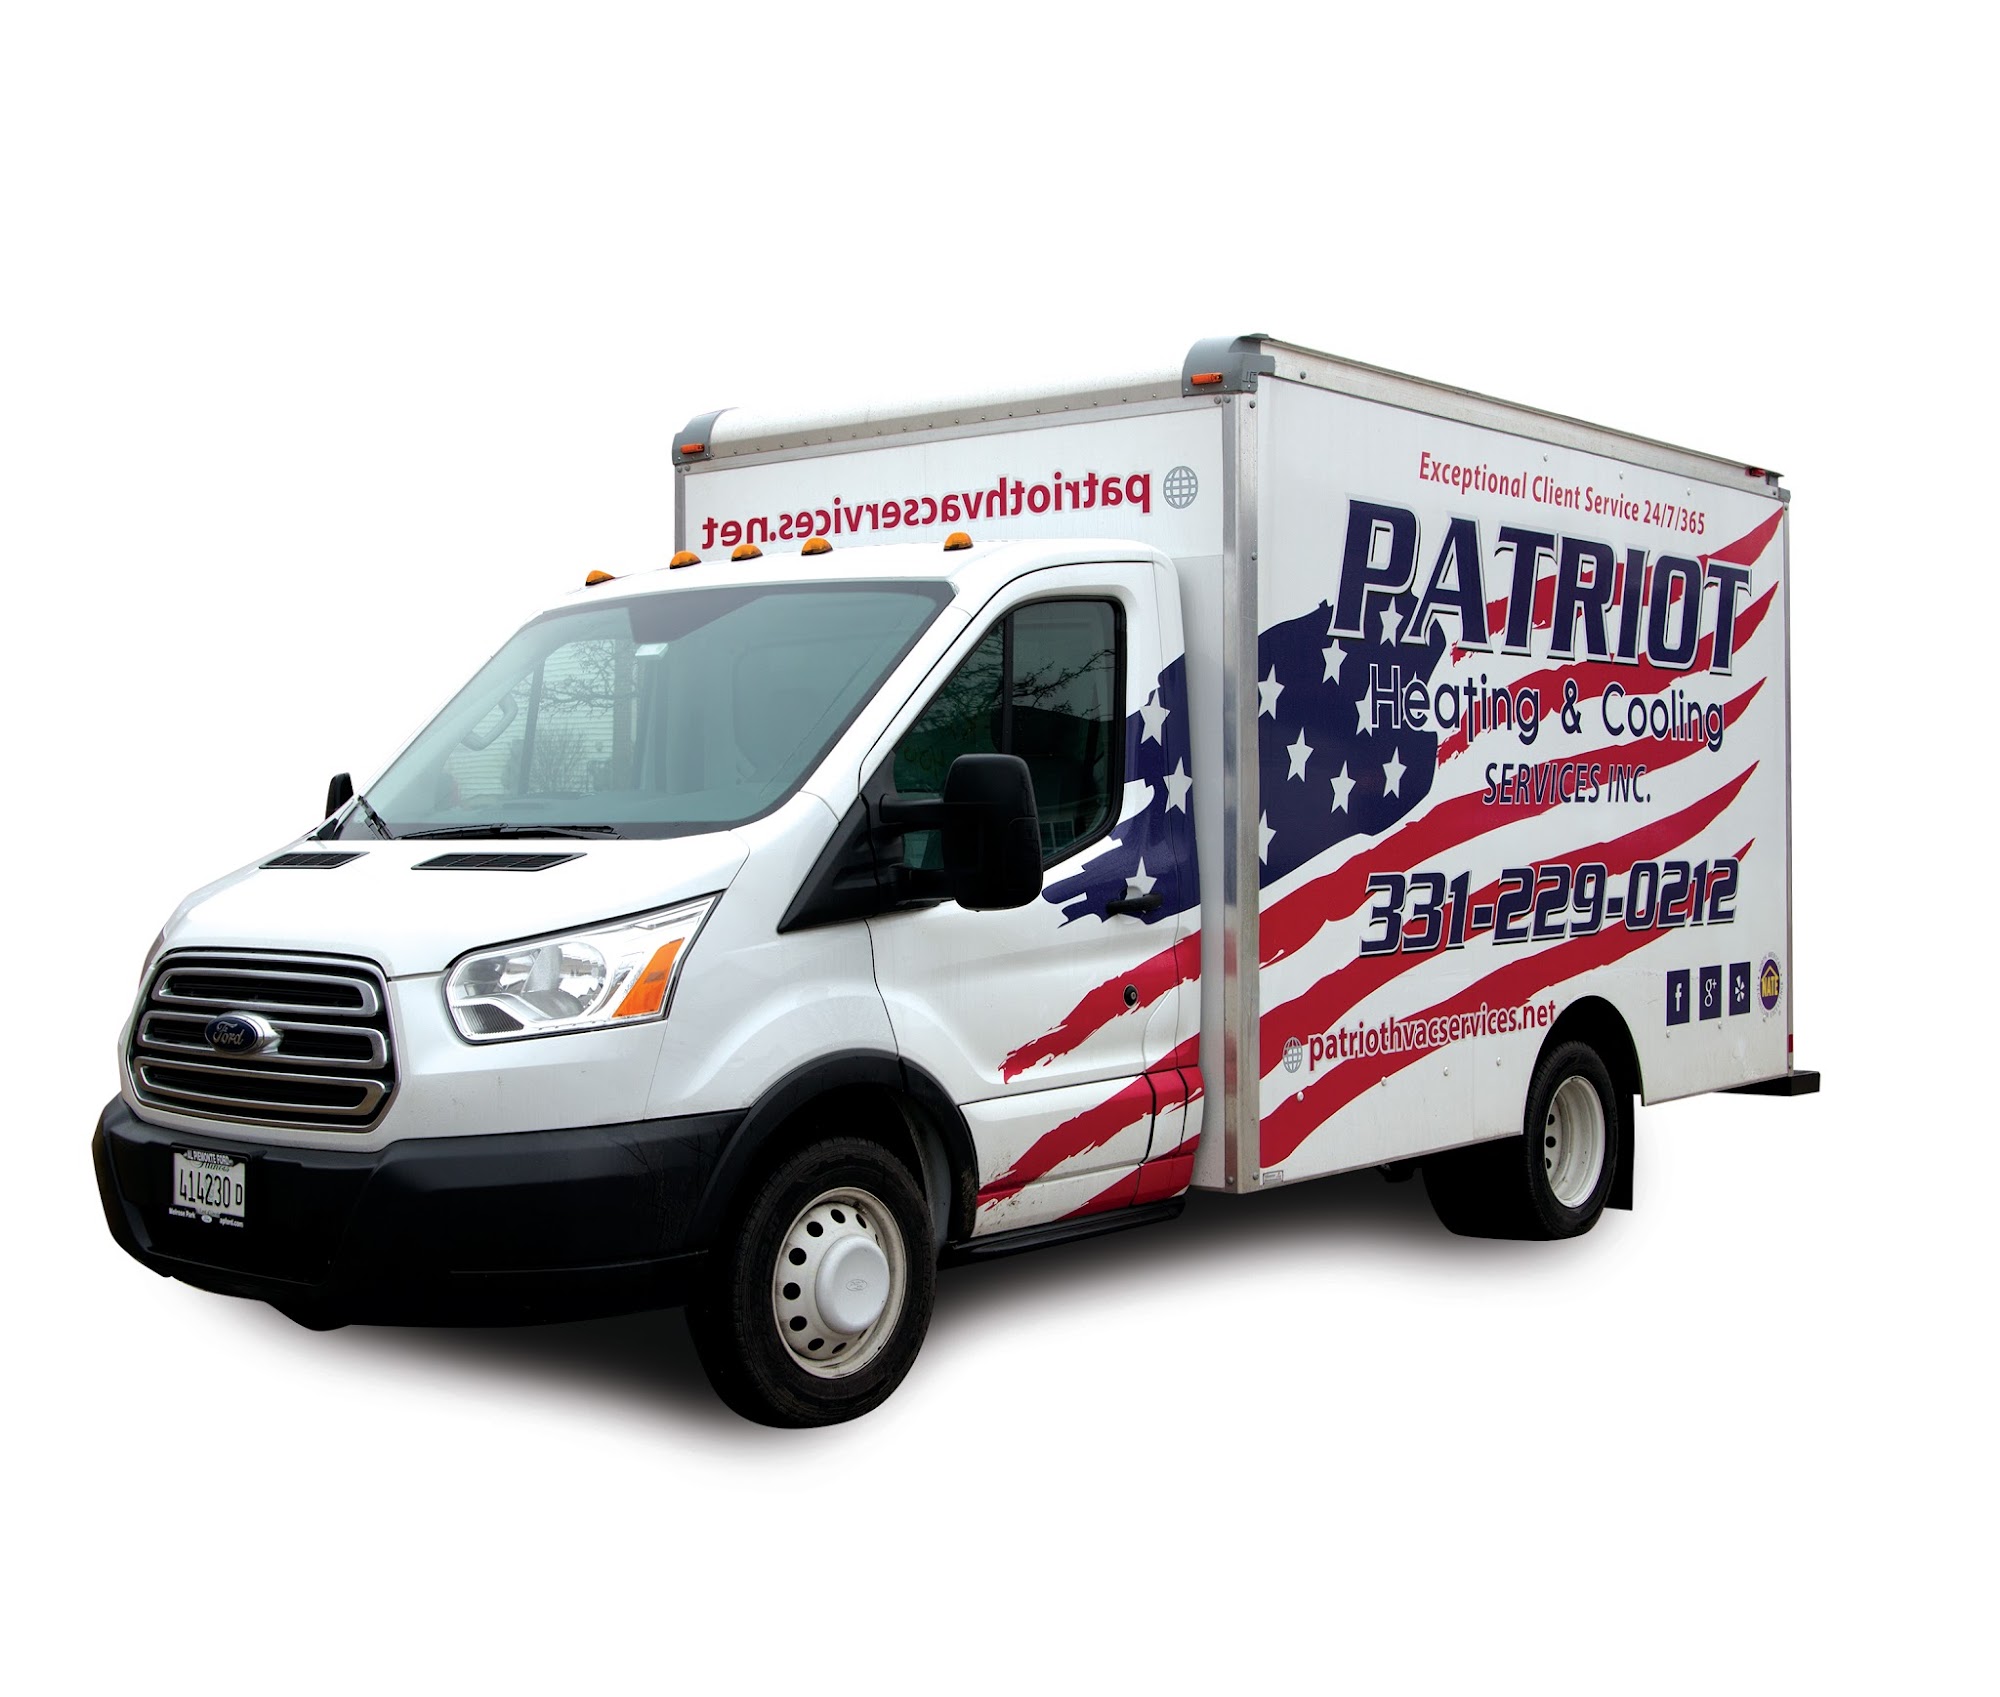 Patriot Heating and Cooling Services Inc.